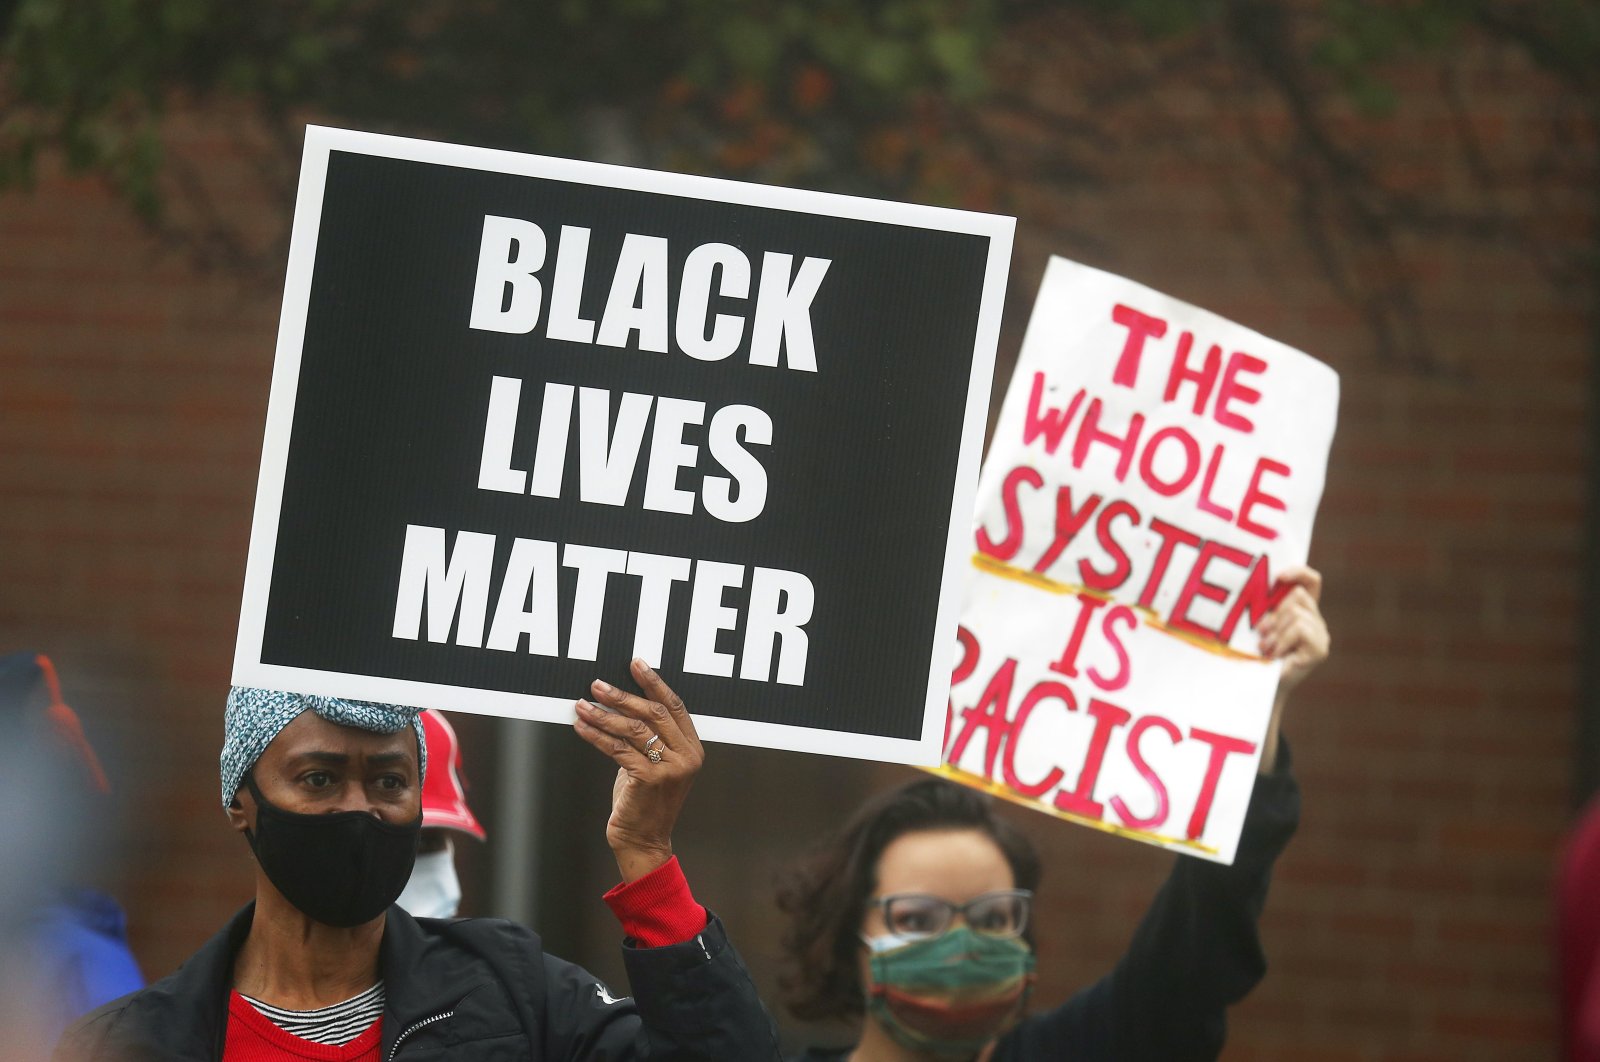 People hold signs during a protest rally for Marcellis Stinnette who was killed by Waukegan Police last Tuesday in Waukegan, Illinois, Oct. 22, 2020. (AP Photo)